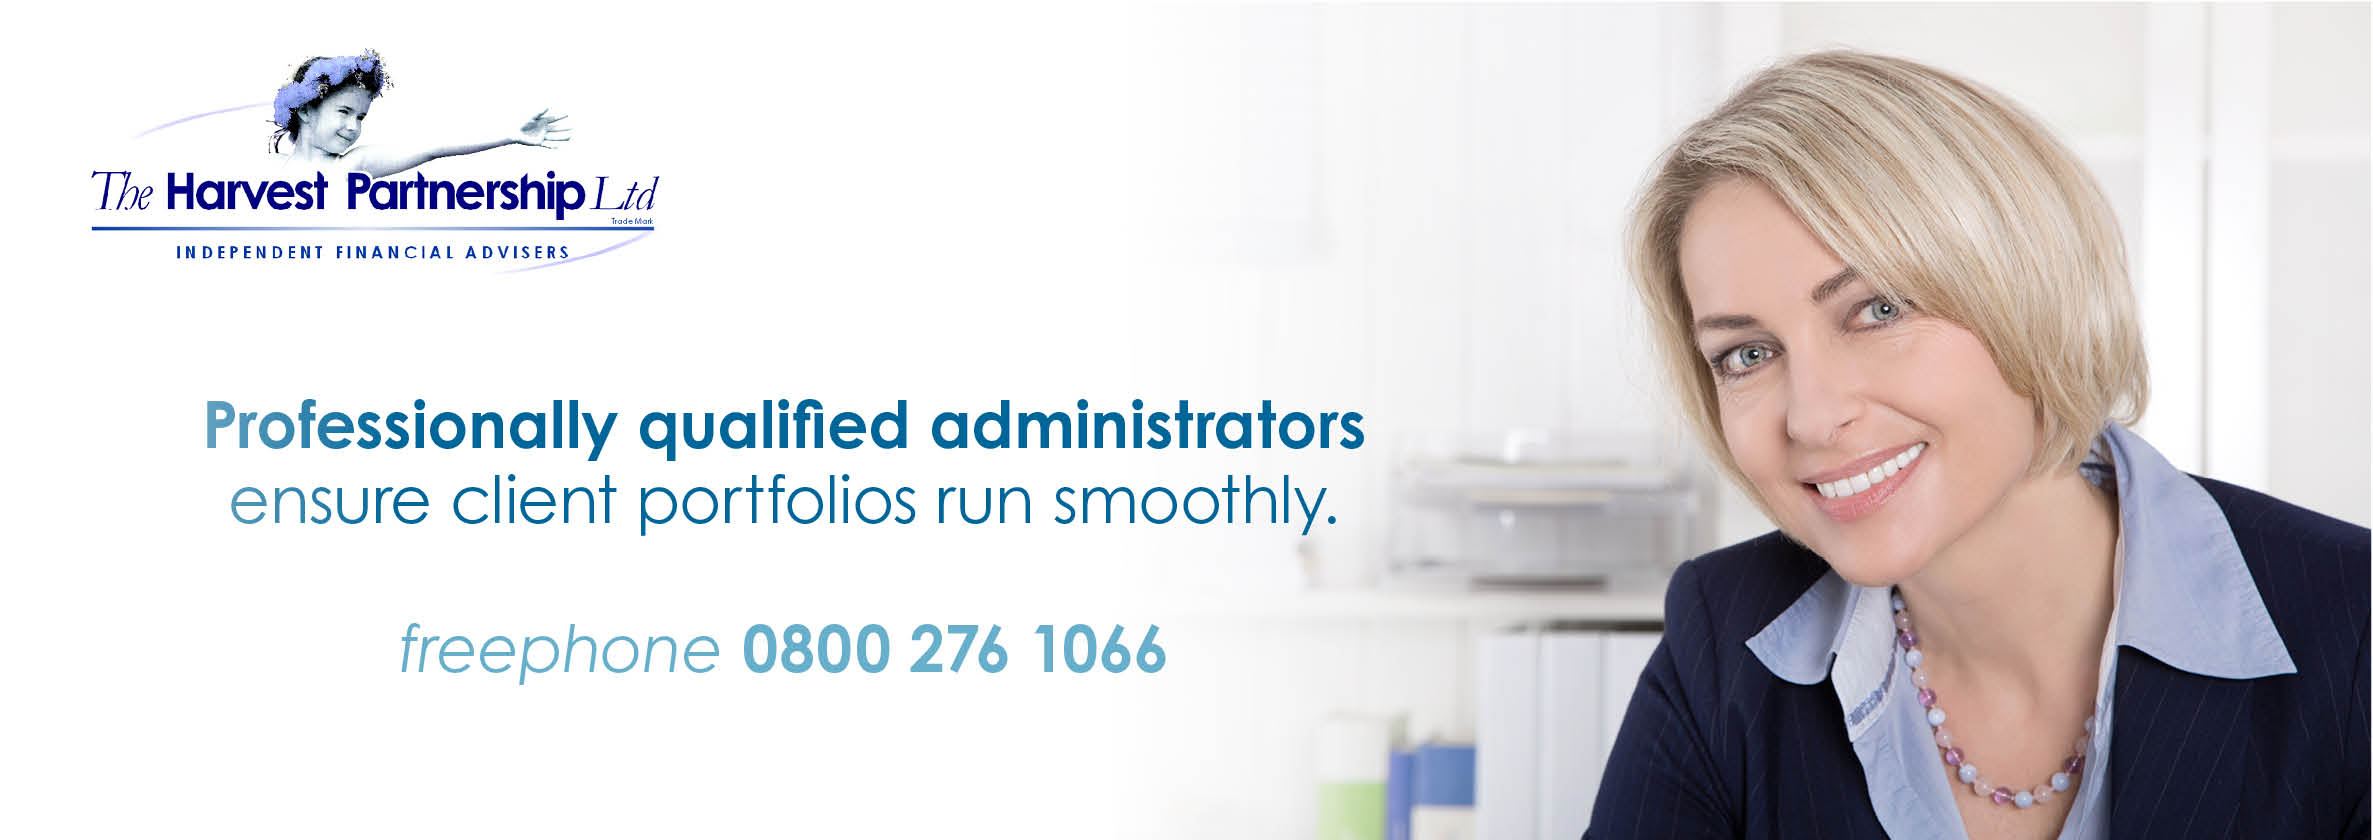 Practical and efficient administration stops problems in their tracks.